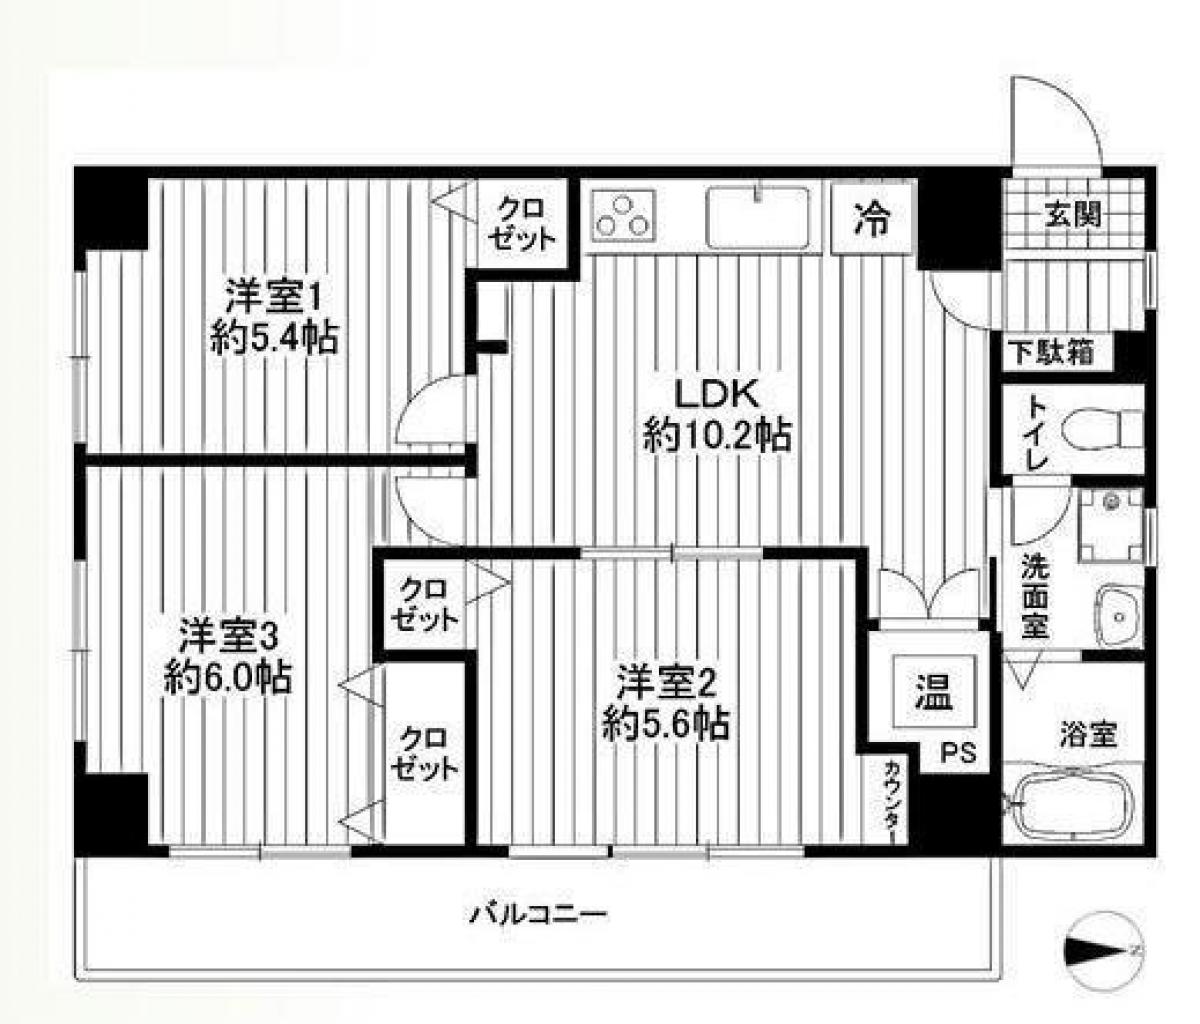 Picture of Apartment For Sale in Adachi Ku, Tokyo, Japan